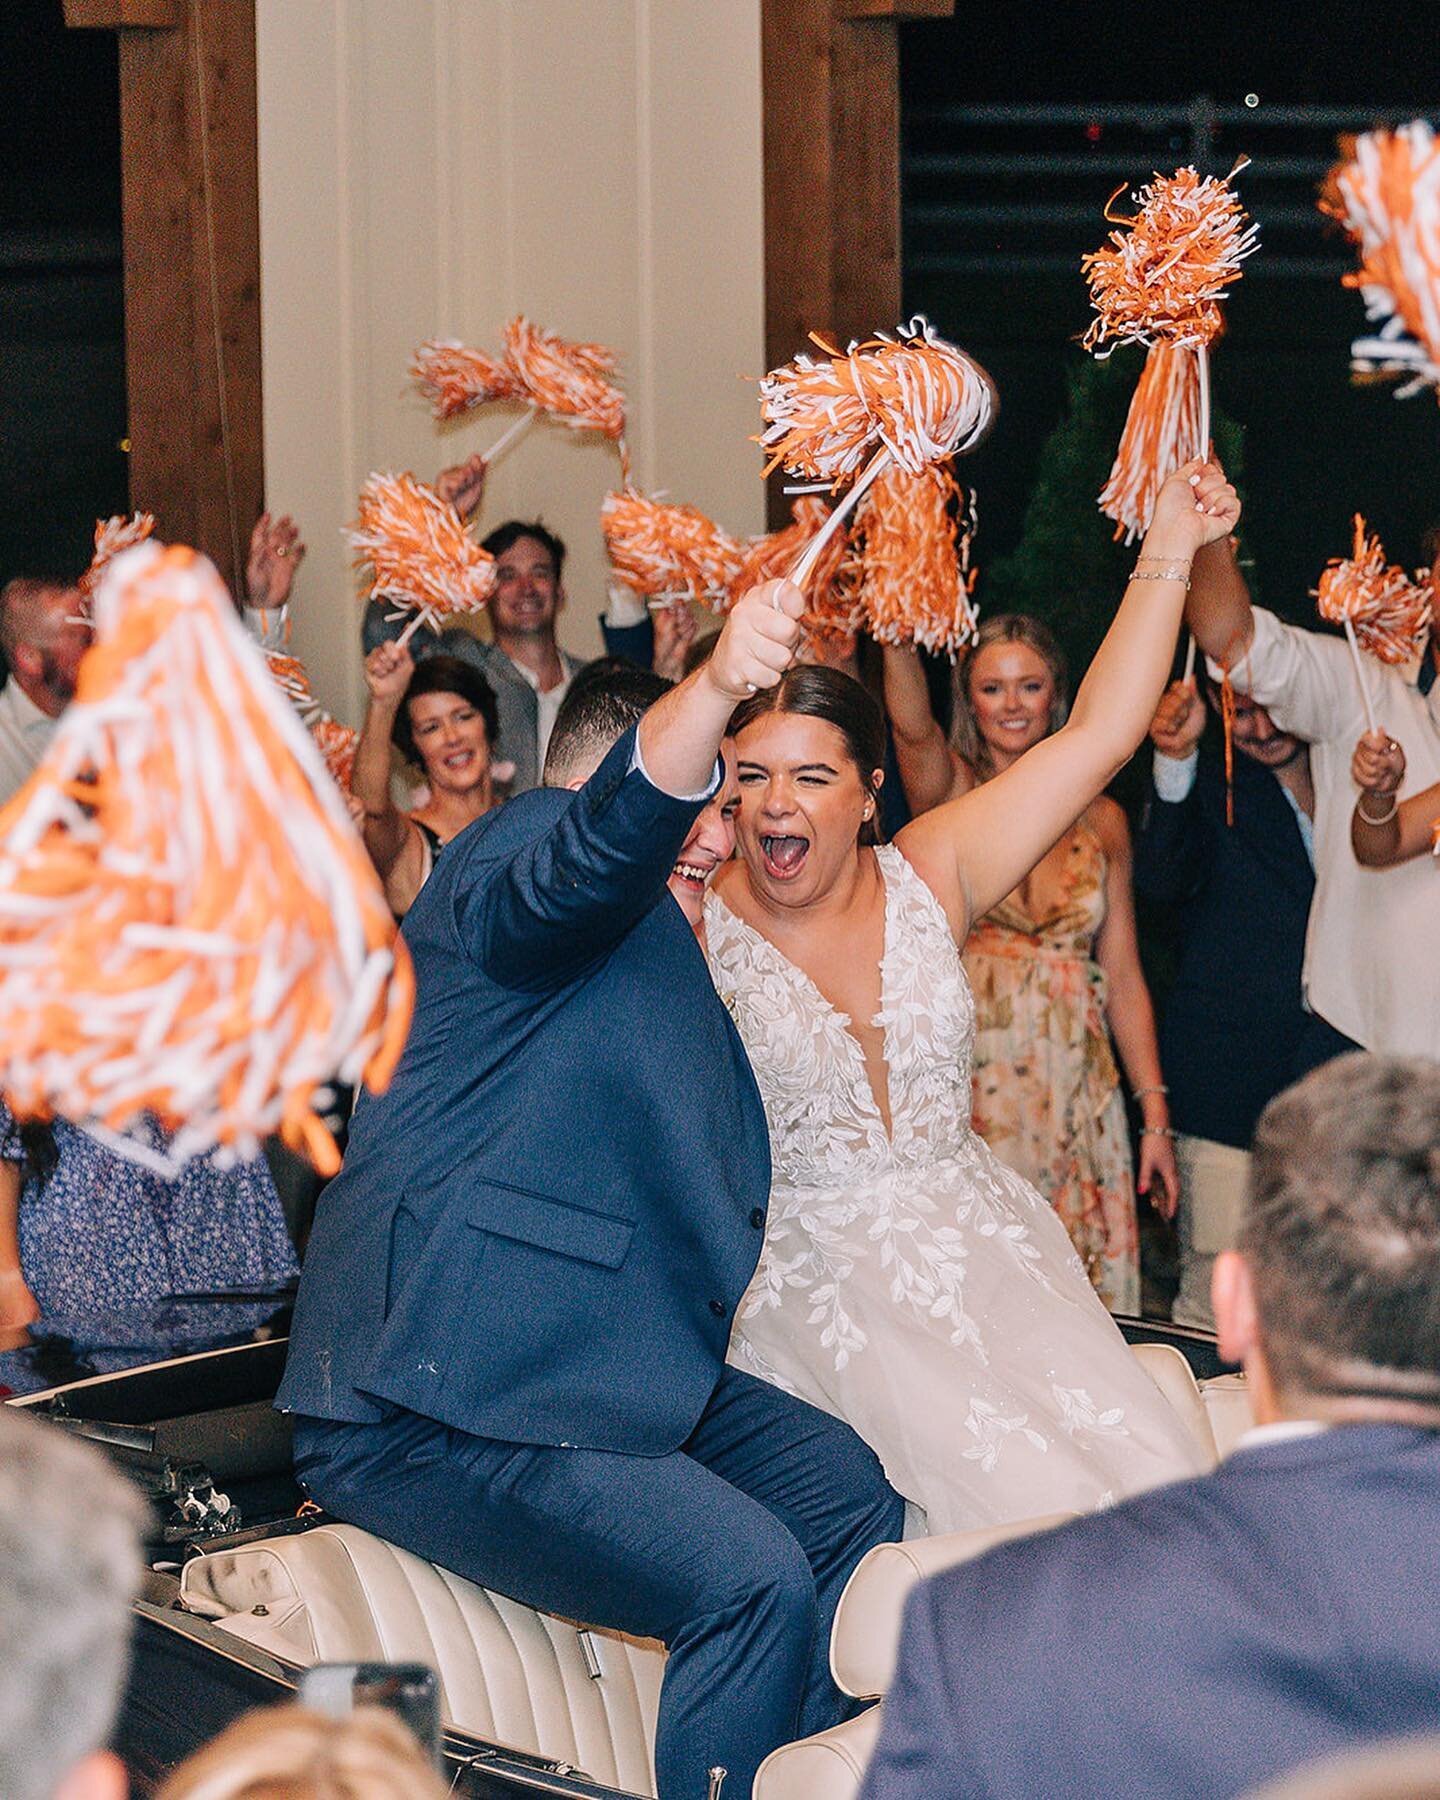 Can&rsquo;t kick off football season without sharing these send off pics from Josh and Emmie&rsquo;s wedding! 🧡🧡 #govols 

Vendors:
@marblegatefarm 
@sayyeswithjessweddings 
@stringofpearlsflowers 
@bsloanphotography 
@godjogle 
@theshutterbirdphot